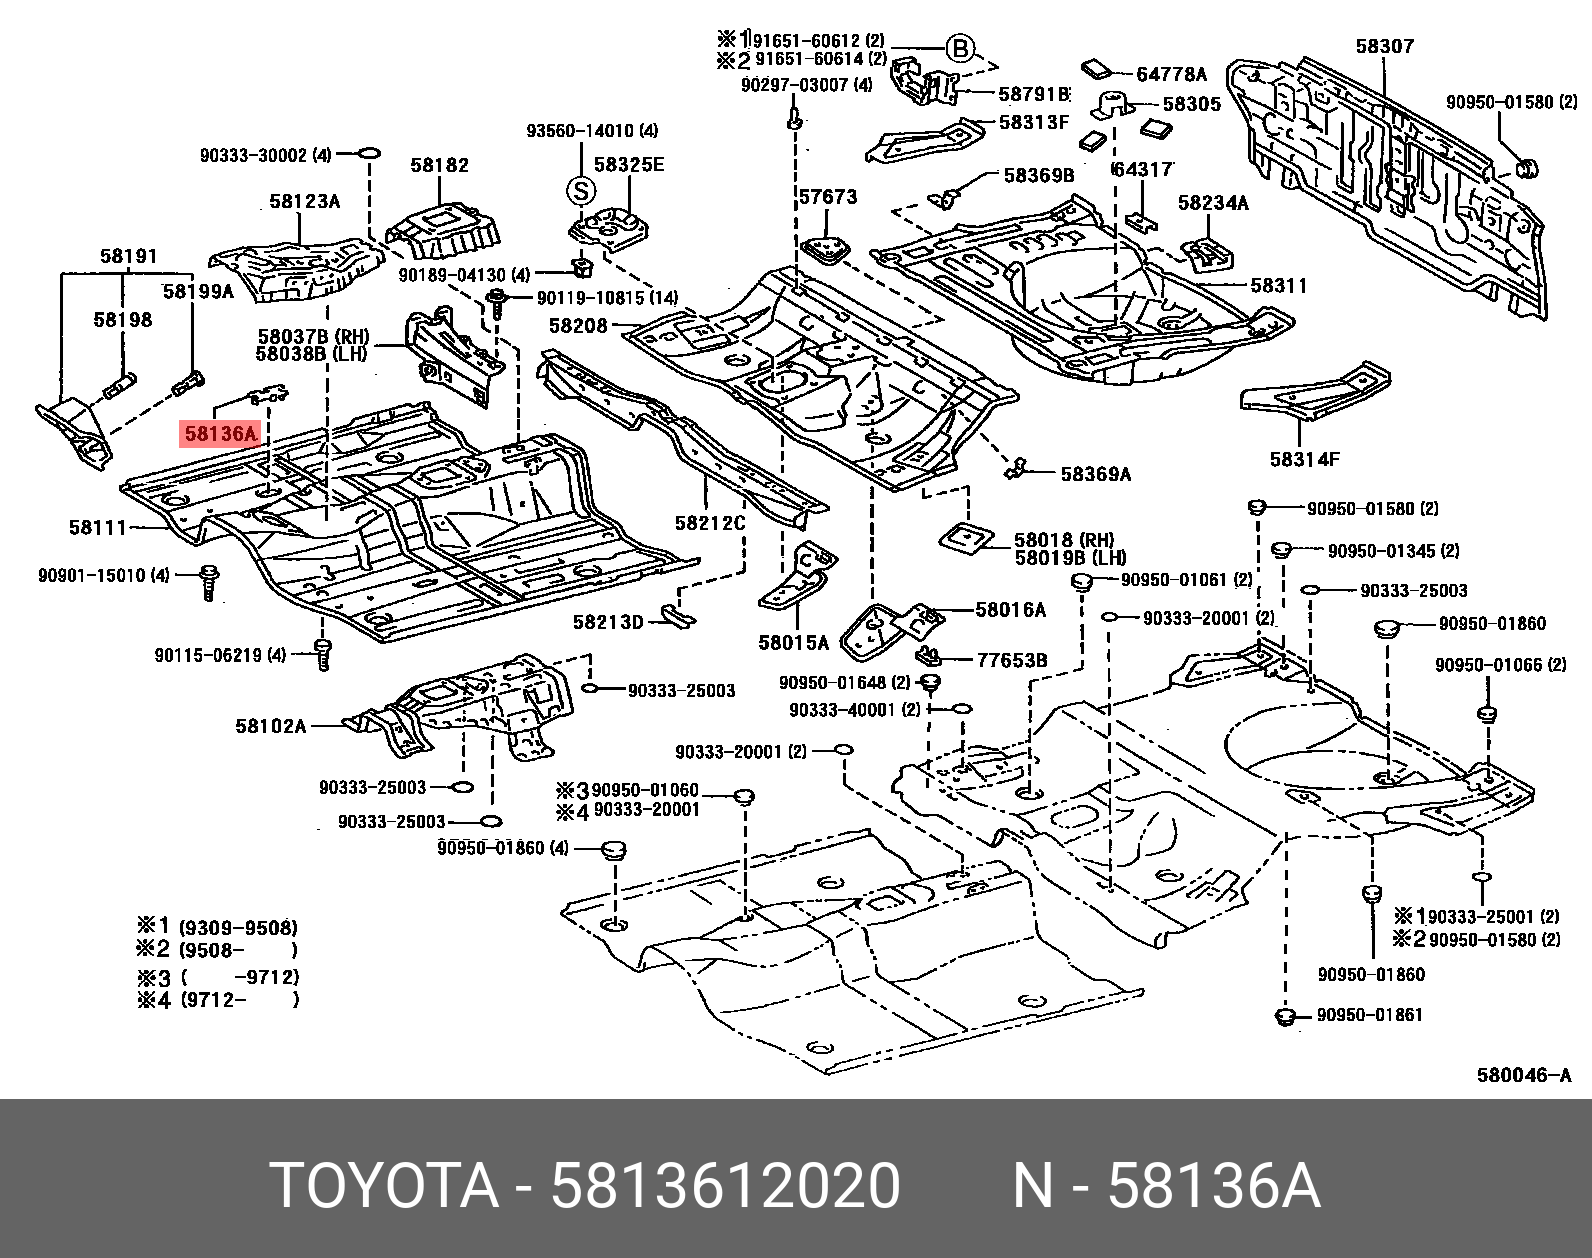 COROLLA LEVIN 198705 - 199106, COVER, FRONT FLOOR SERVICE HOLE